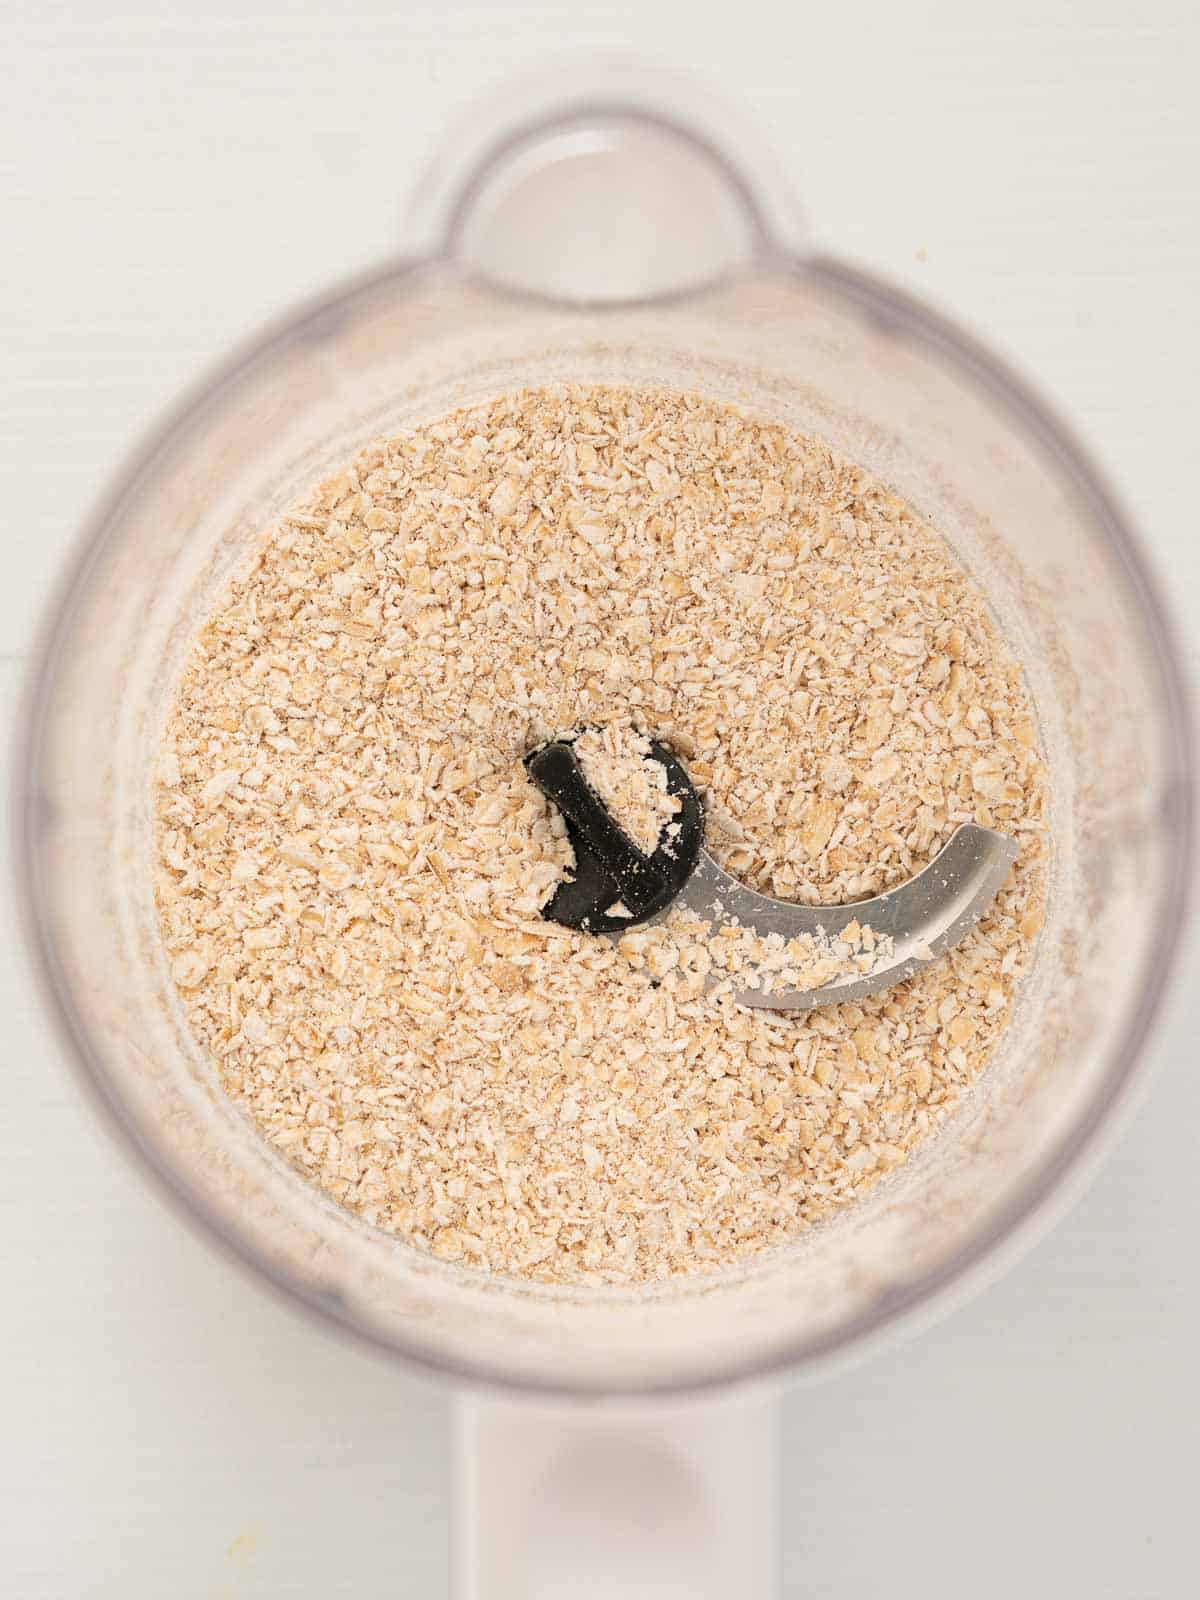 Finely ground oats in a food processor